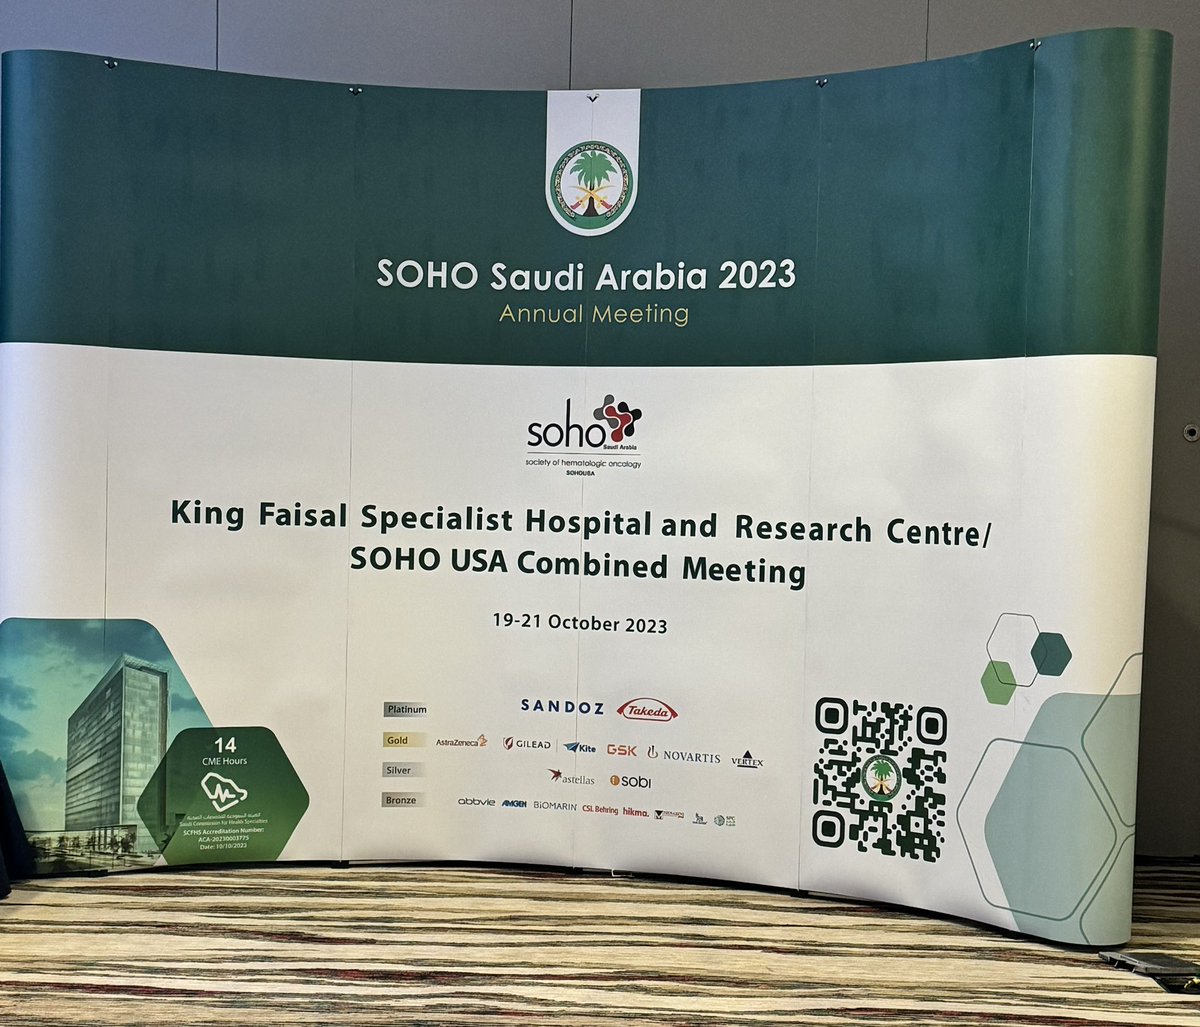 Honored to present at SOHO Saudi Arabia meeting. I am proud of the colleagues advances and achievements at KSA with state of art pt care and research and appreciative for the warm genuine hospitality. sohoksa.com/wp-content/upl… @SocietyofHemOnc @KFSH @MoffittNews